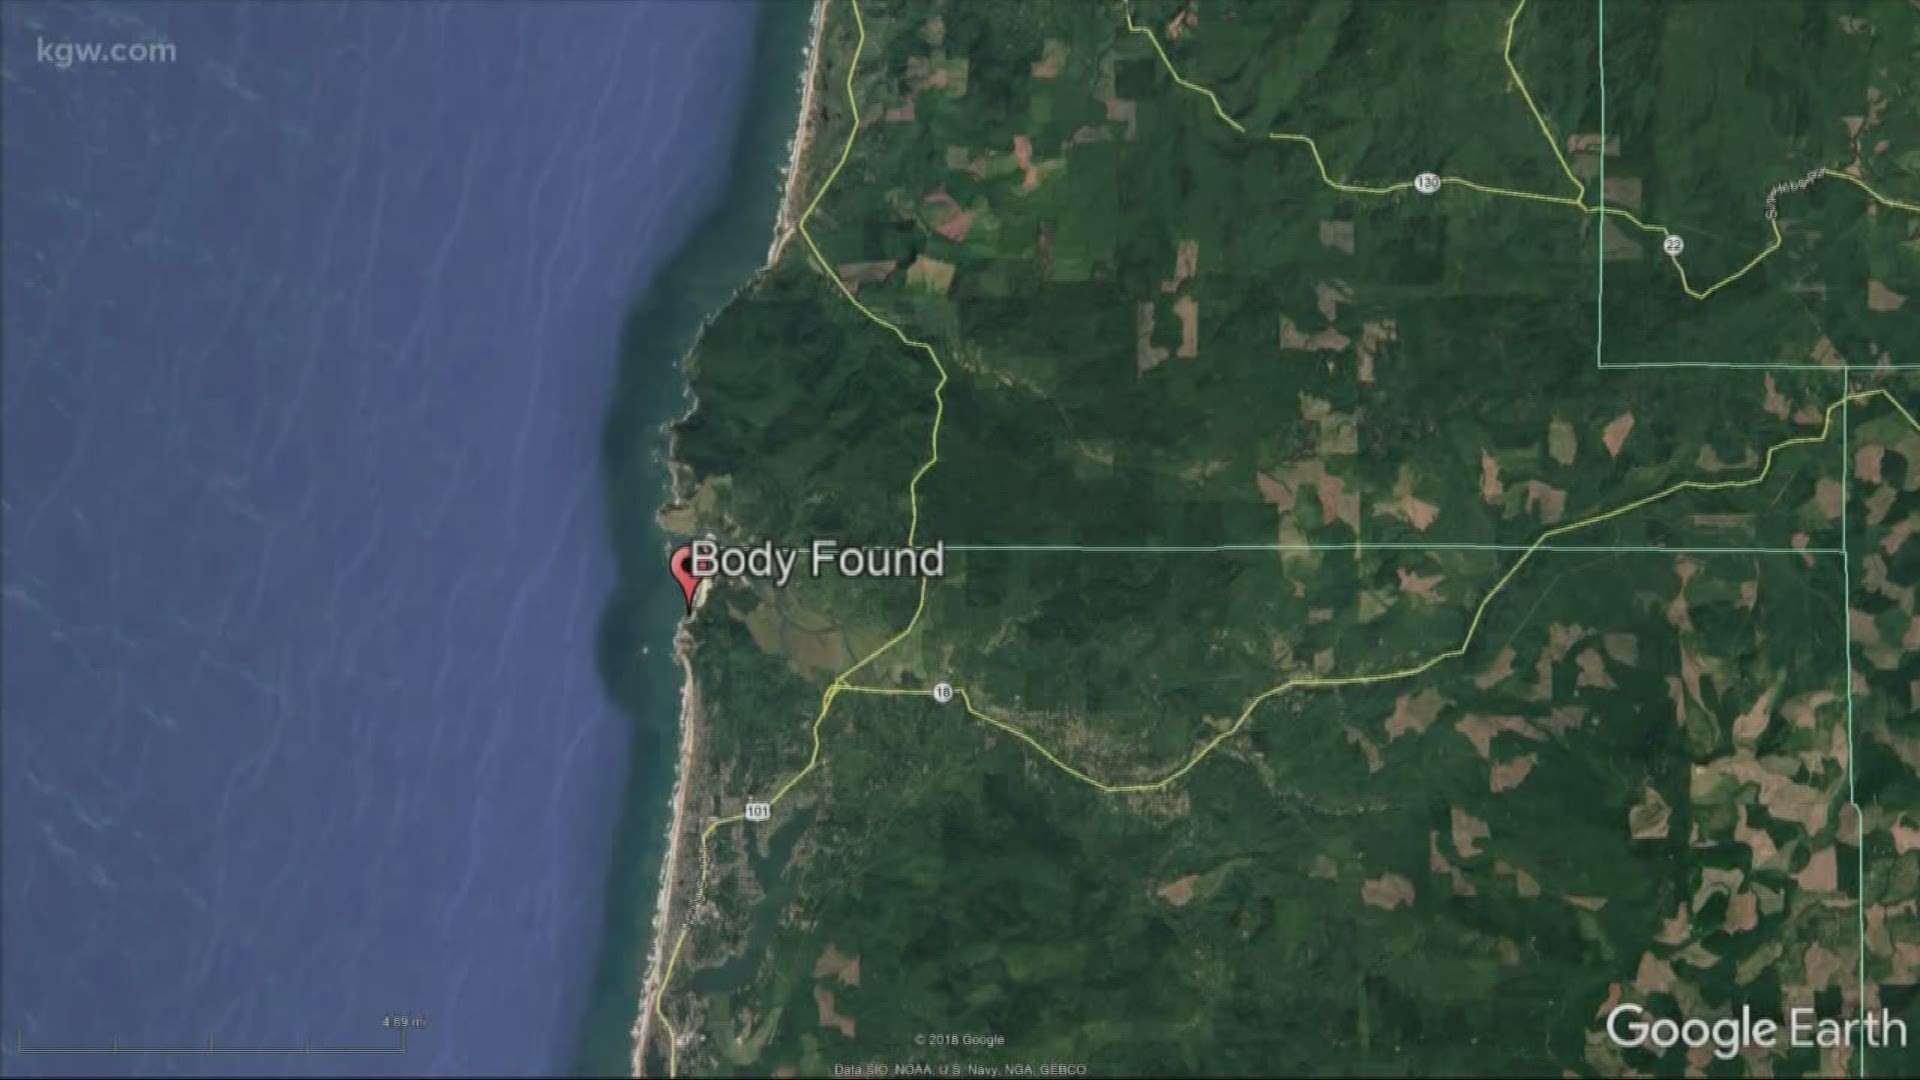 A woman's body was pulled from the waves on the Oregon Coast on Sunday, and police in Lincoln County don't know who she is yet.